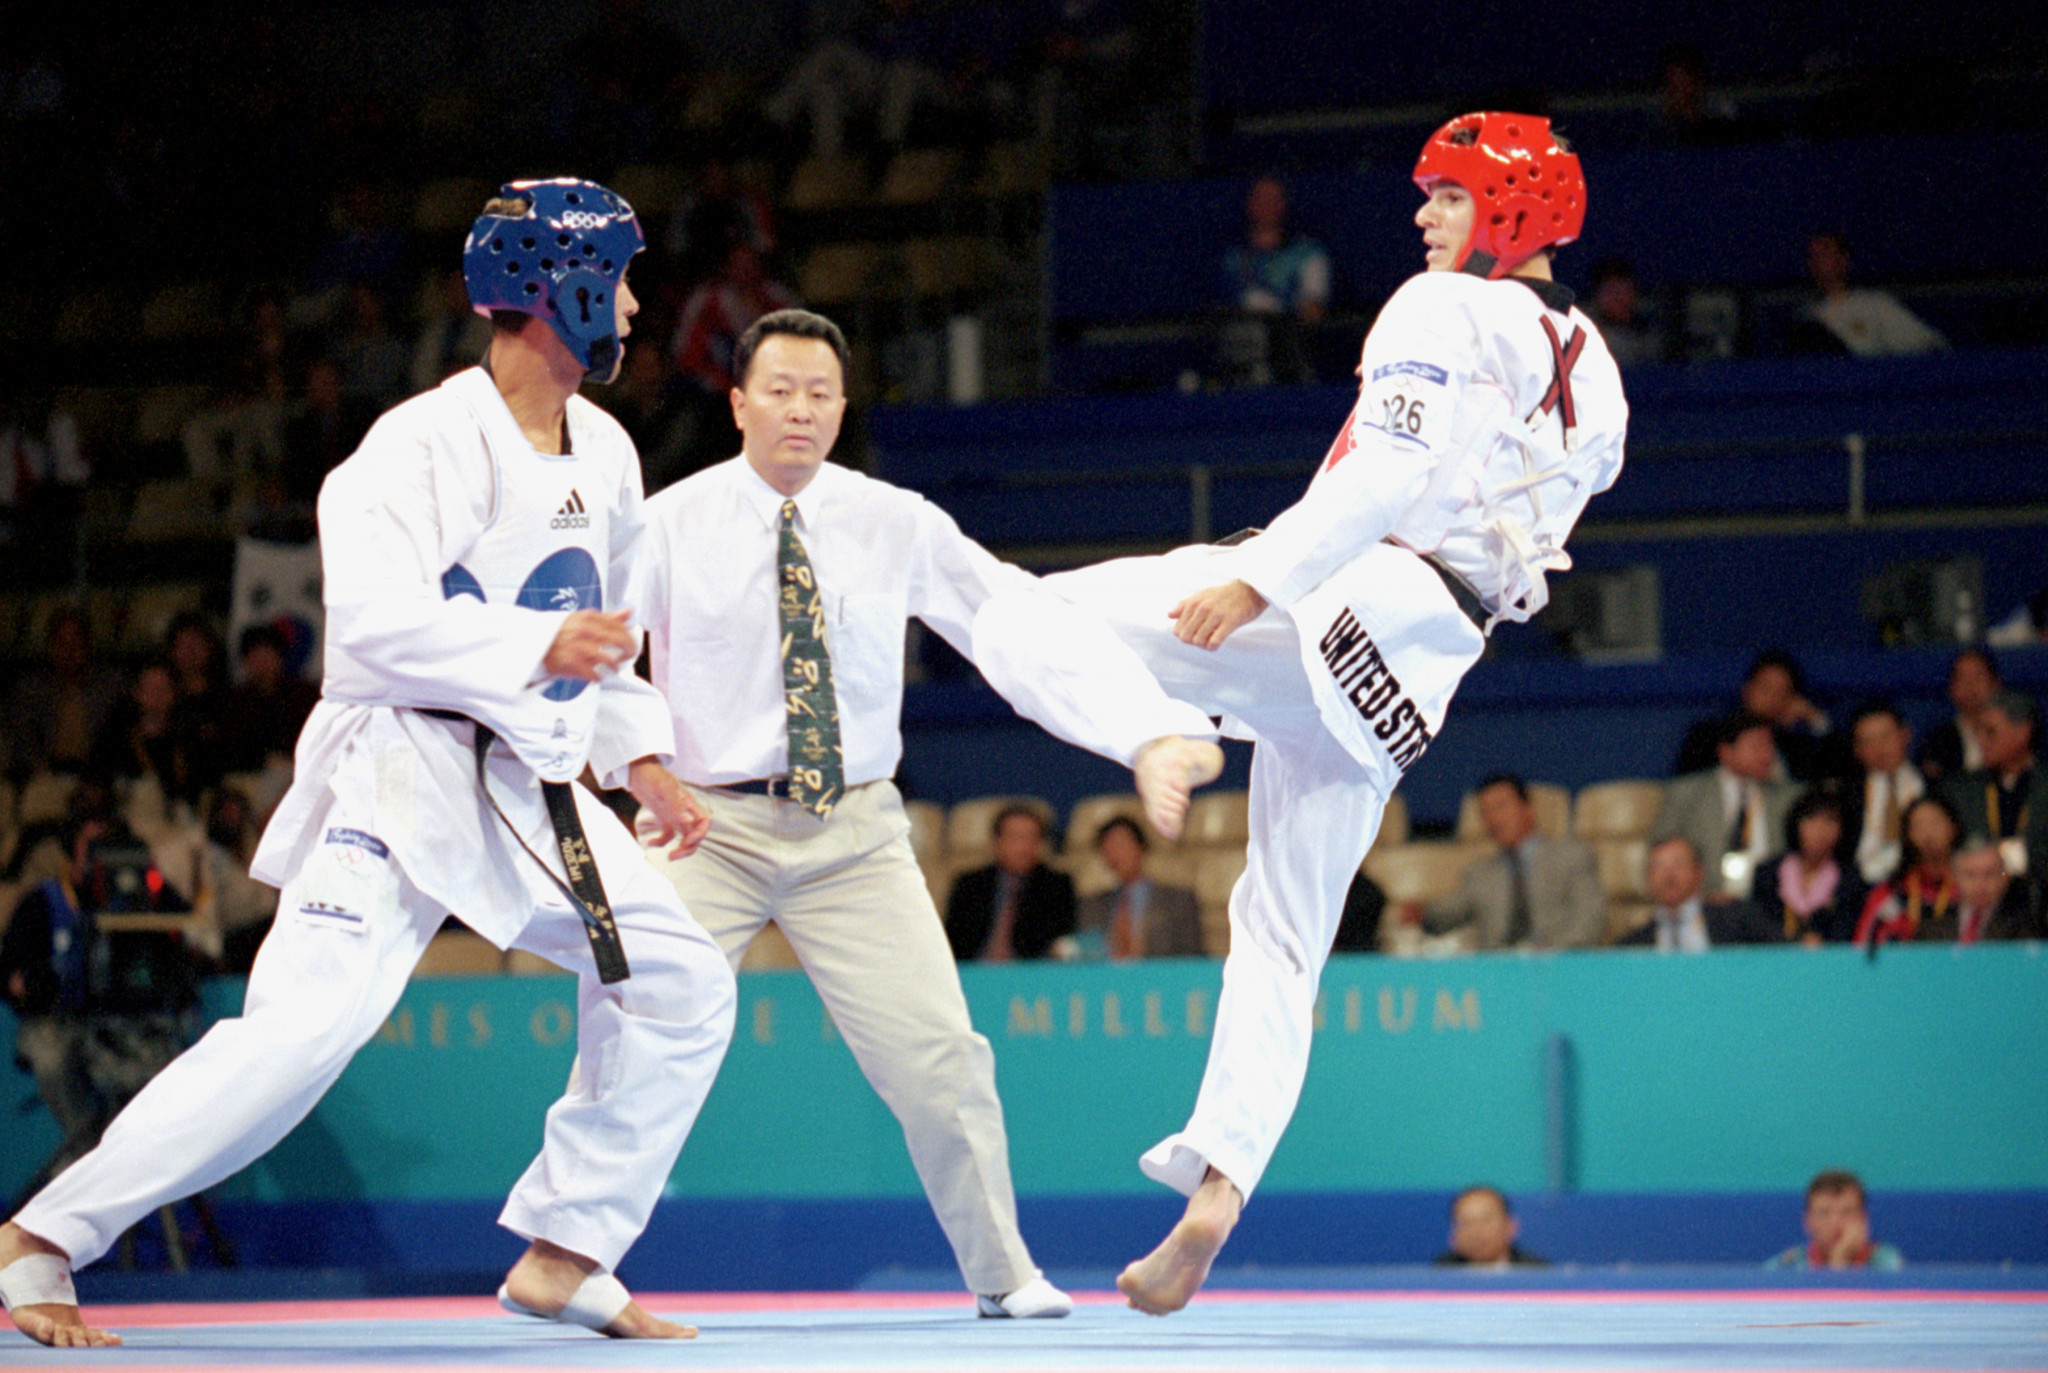 Taekwondo debuted at the Olympics in Sydney in 2000 ©Getty Images